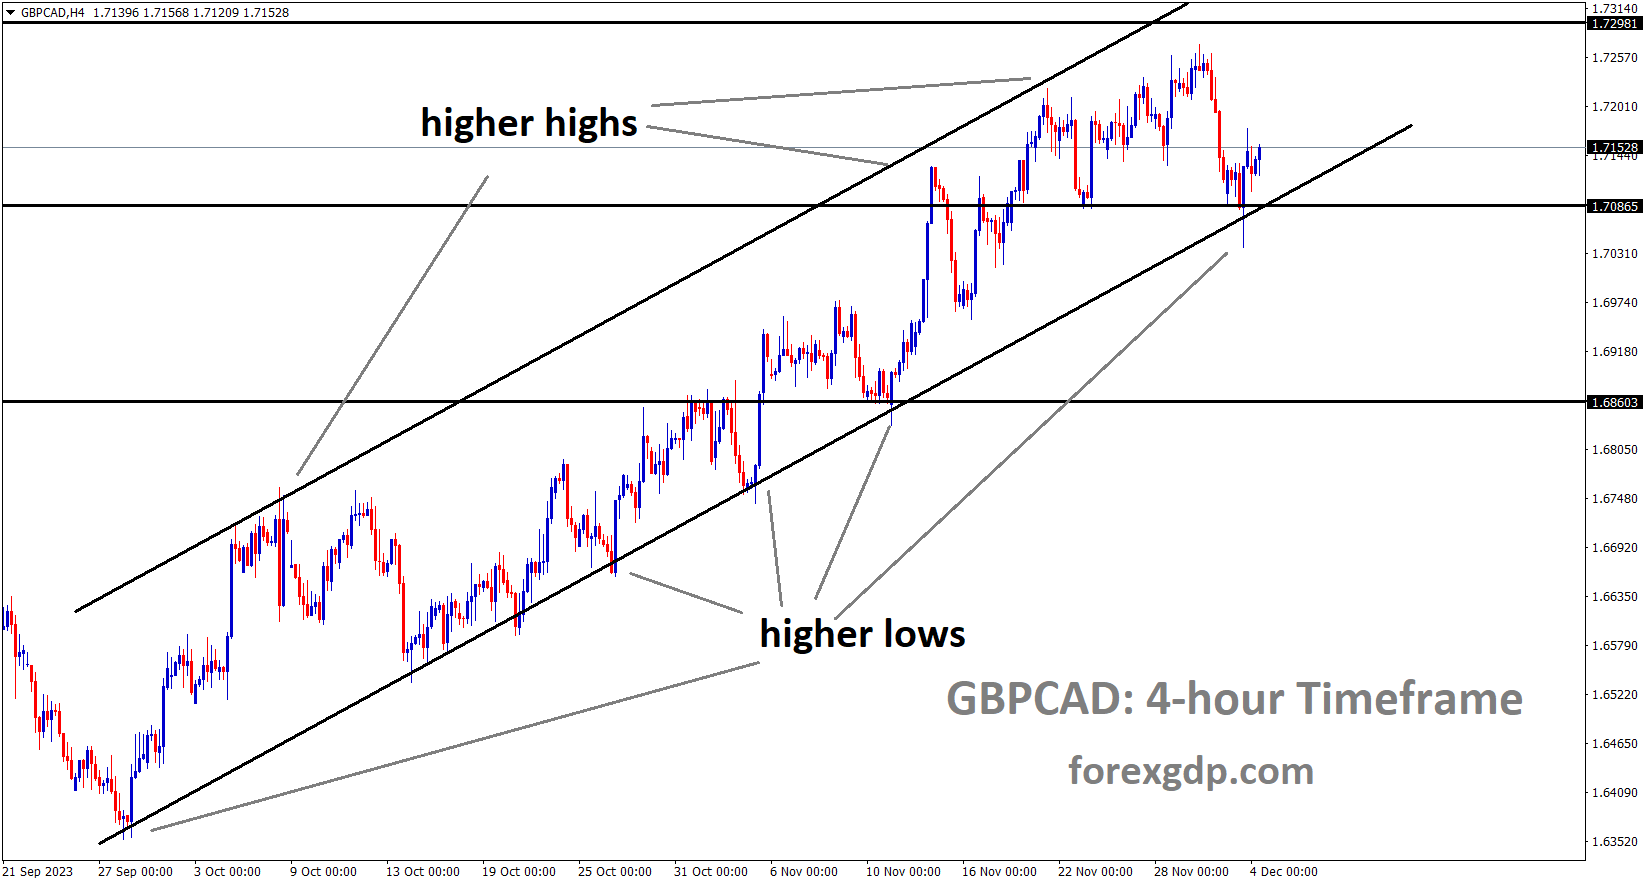 GBPCAD is moving in an Ascending channel and the market has rebounded from the higher low area of the channel